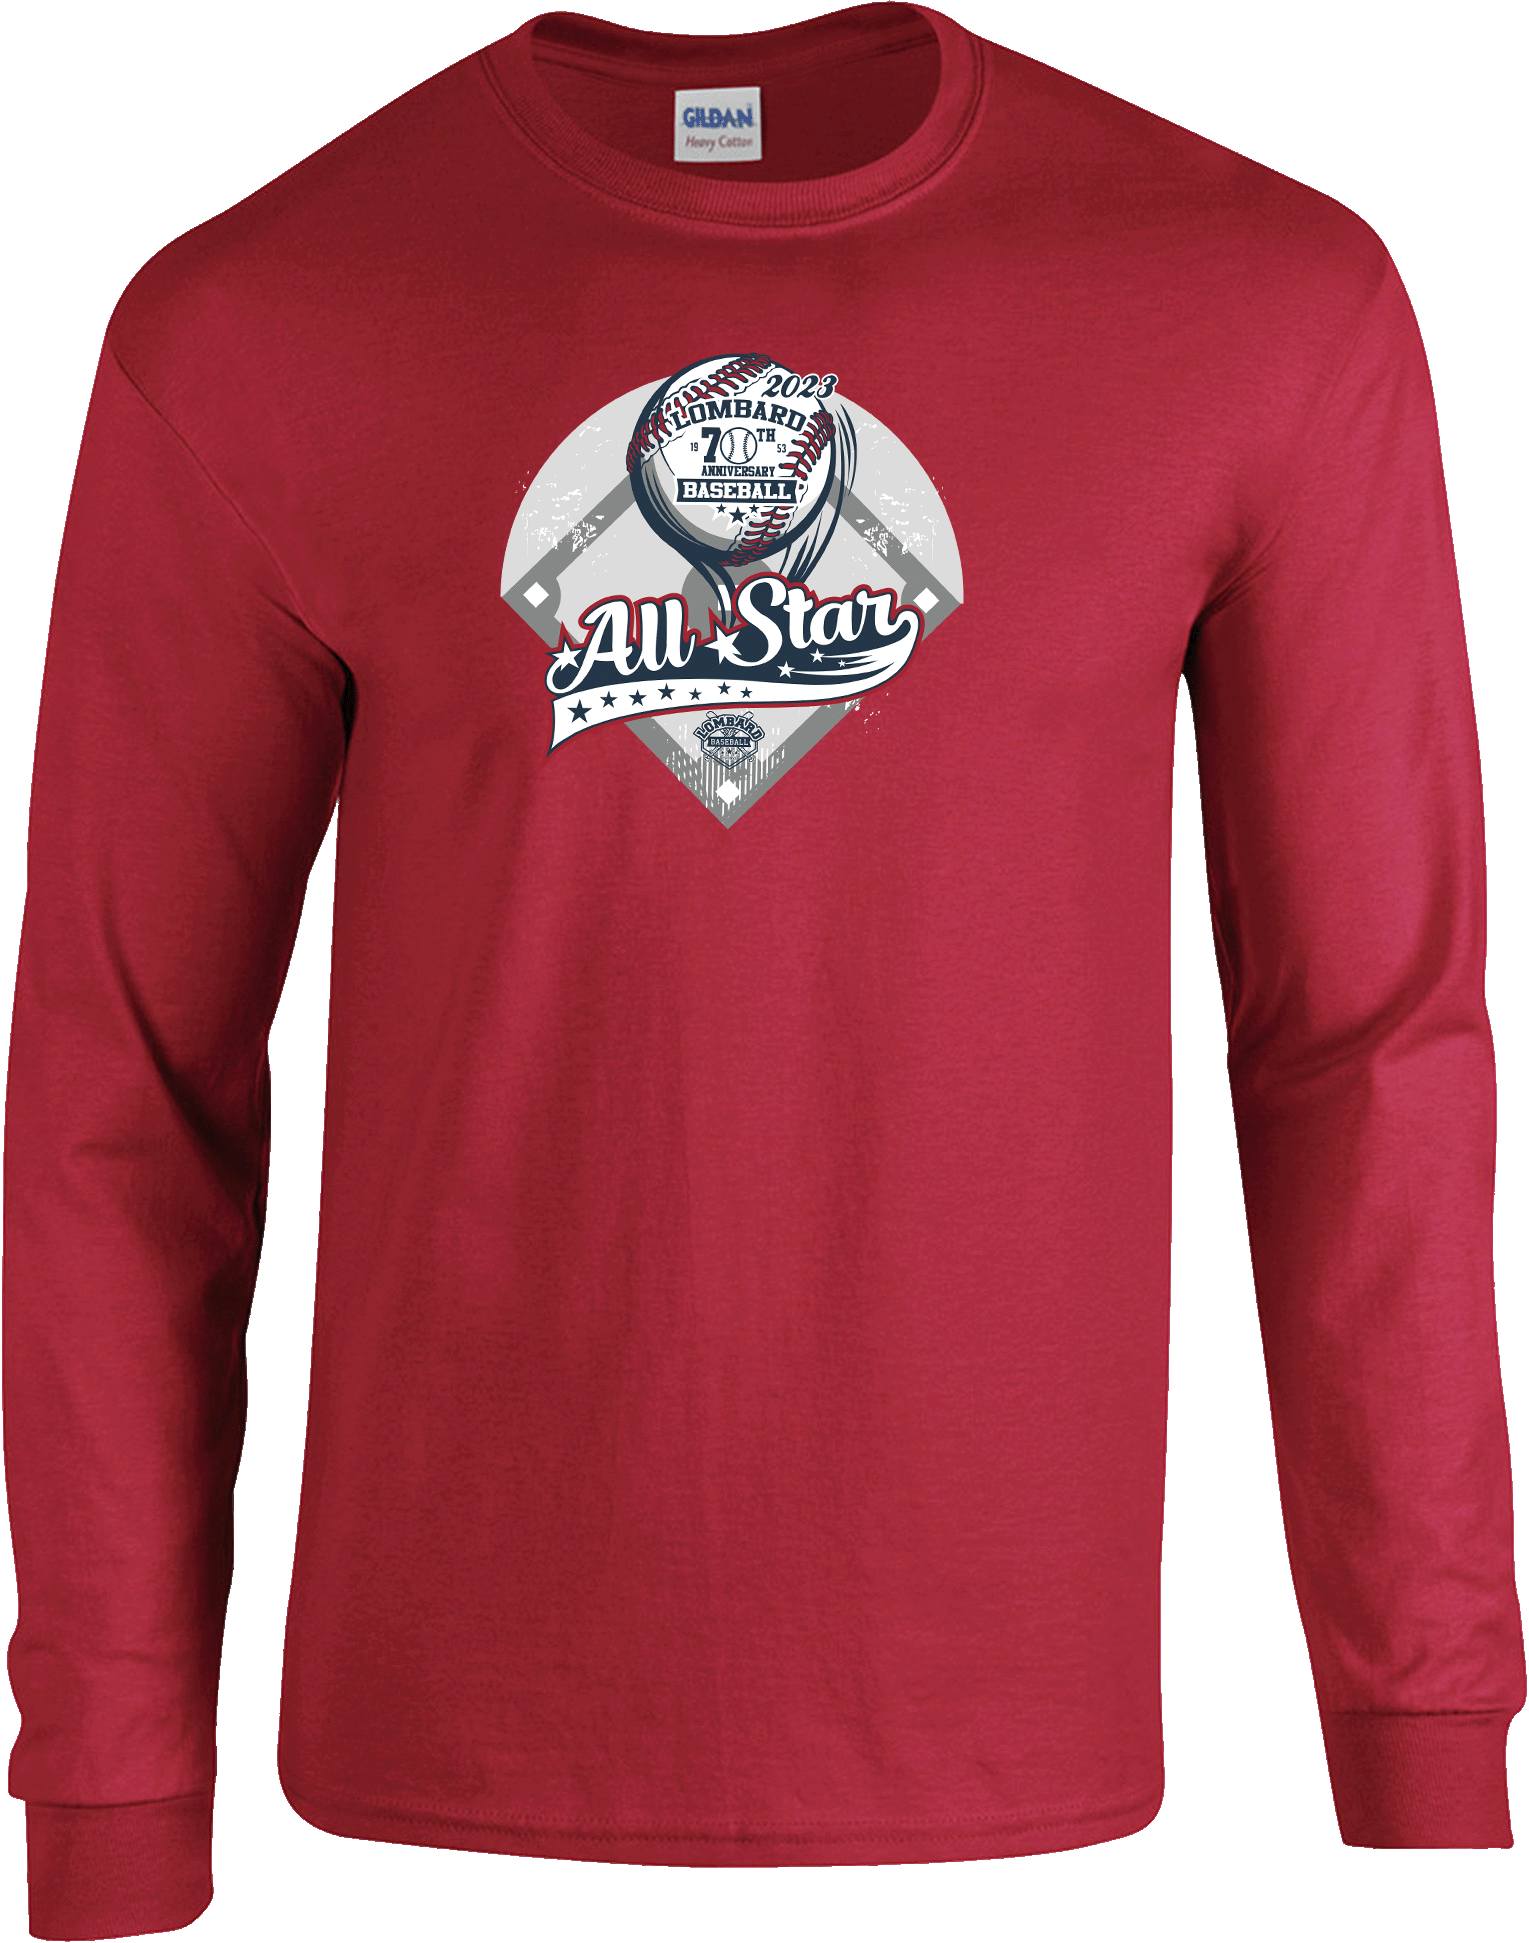 LONG SLEEVES - 2023 Lombard Baseball League's 70th Anniversary All Star Event